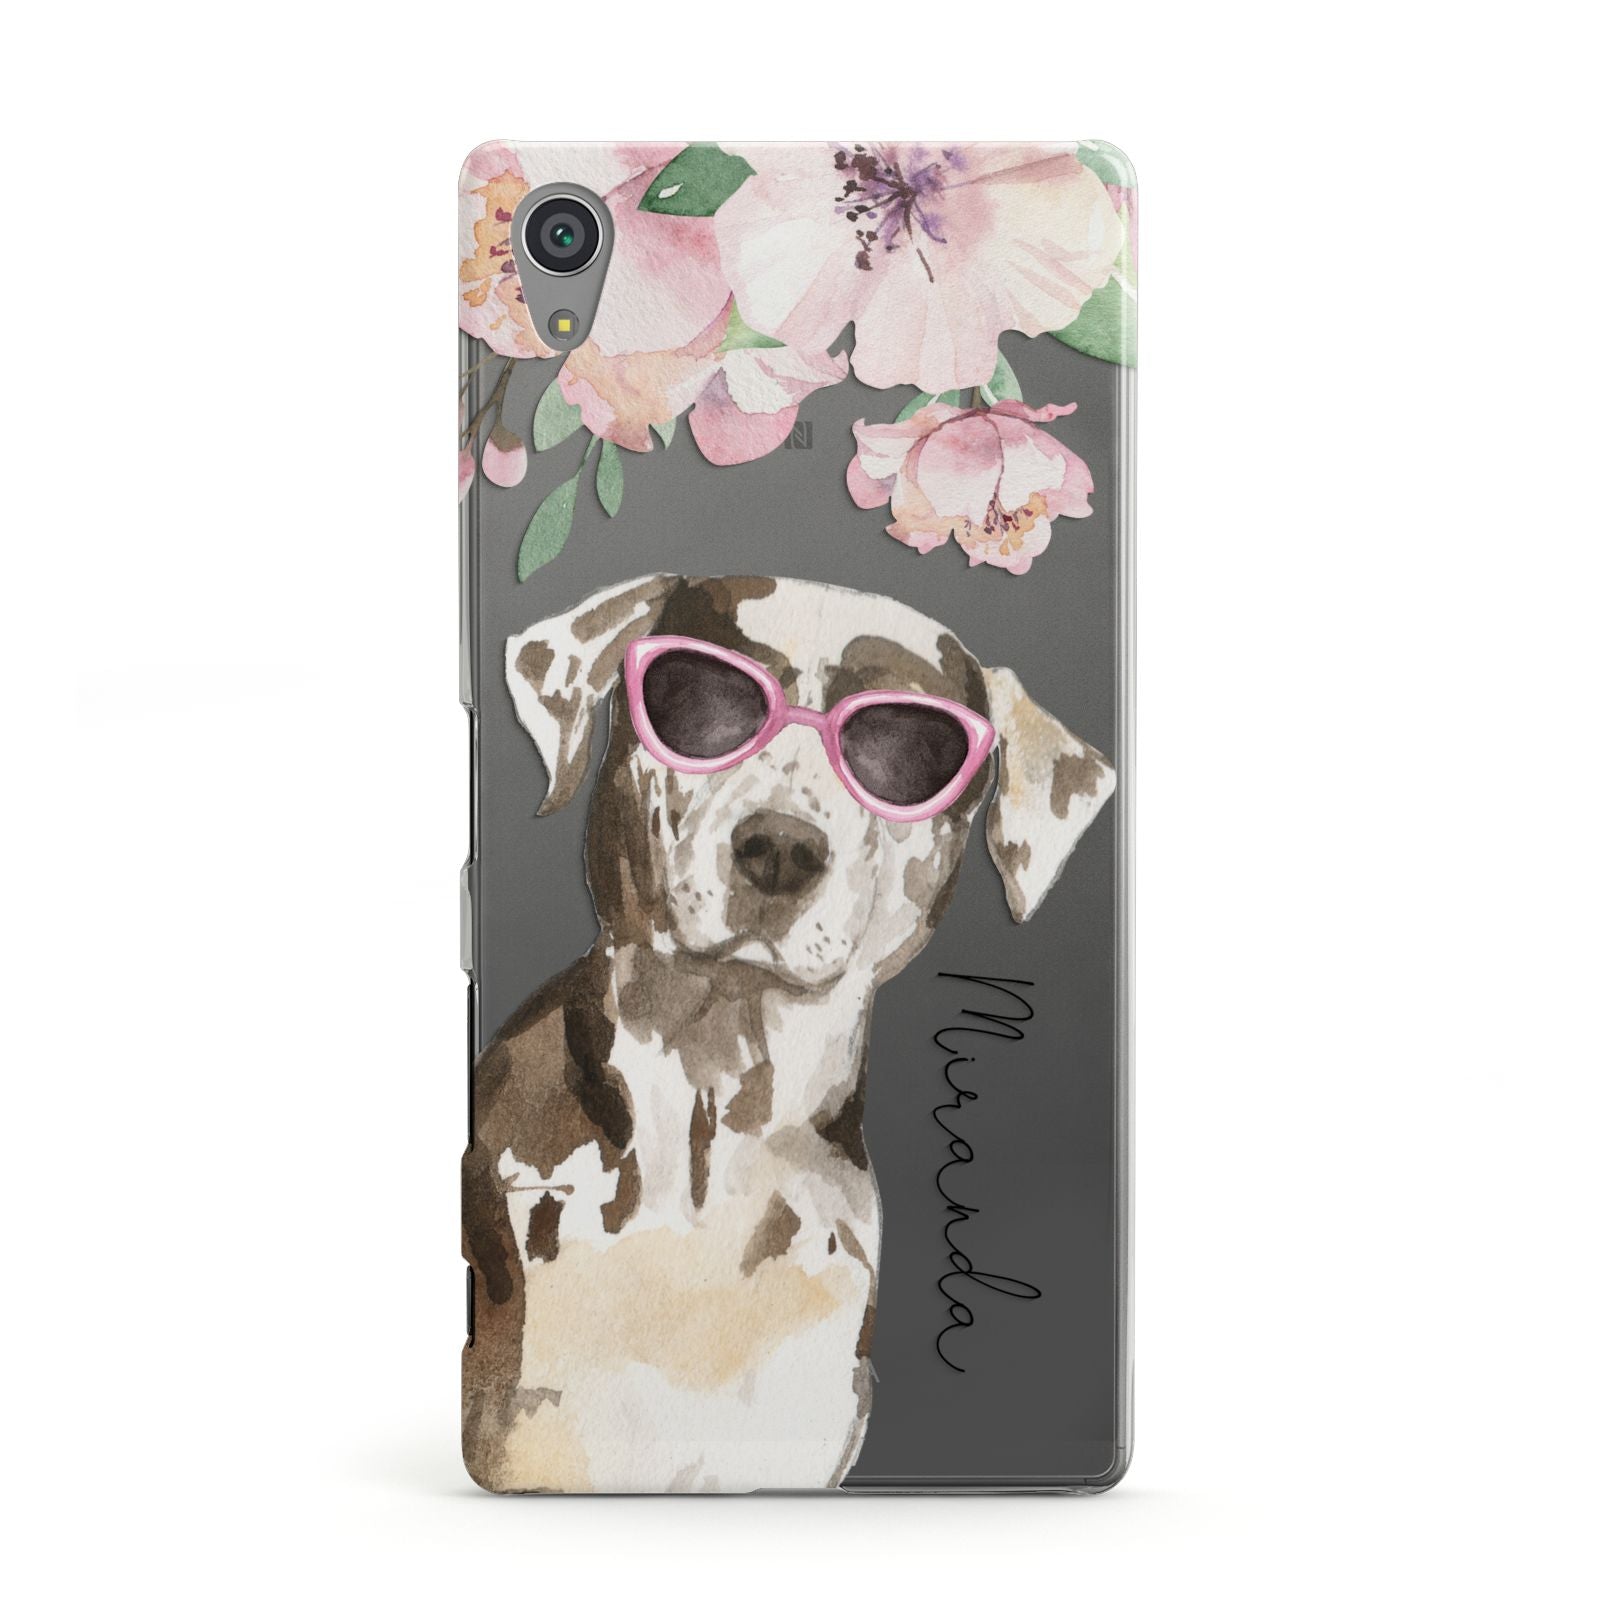 Personalised Catahoula Leopard Dog Sony Xperia Case